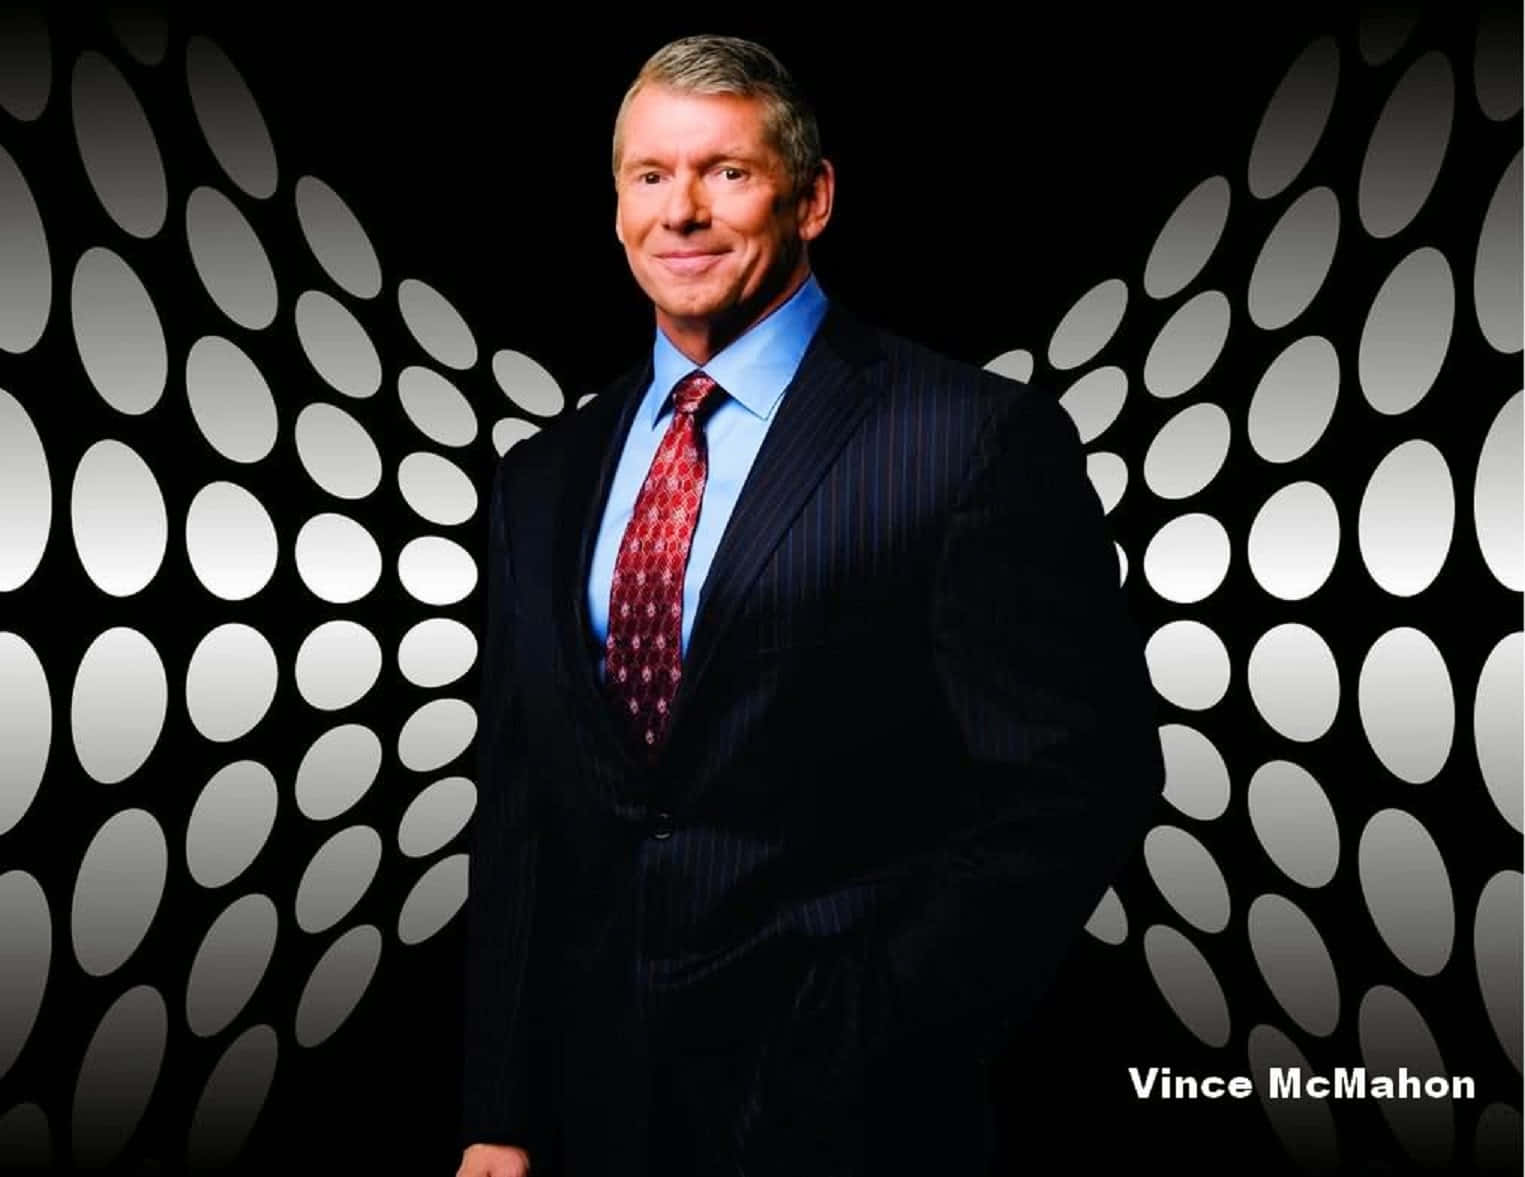 Ceo Of Wwe Vince Mcmahon Wallpaper